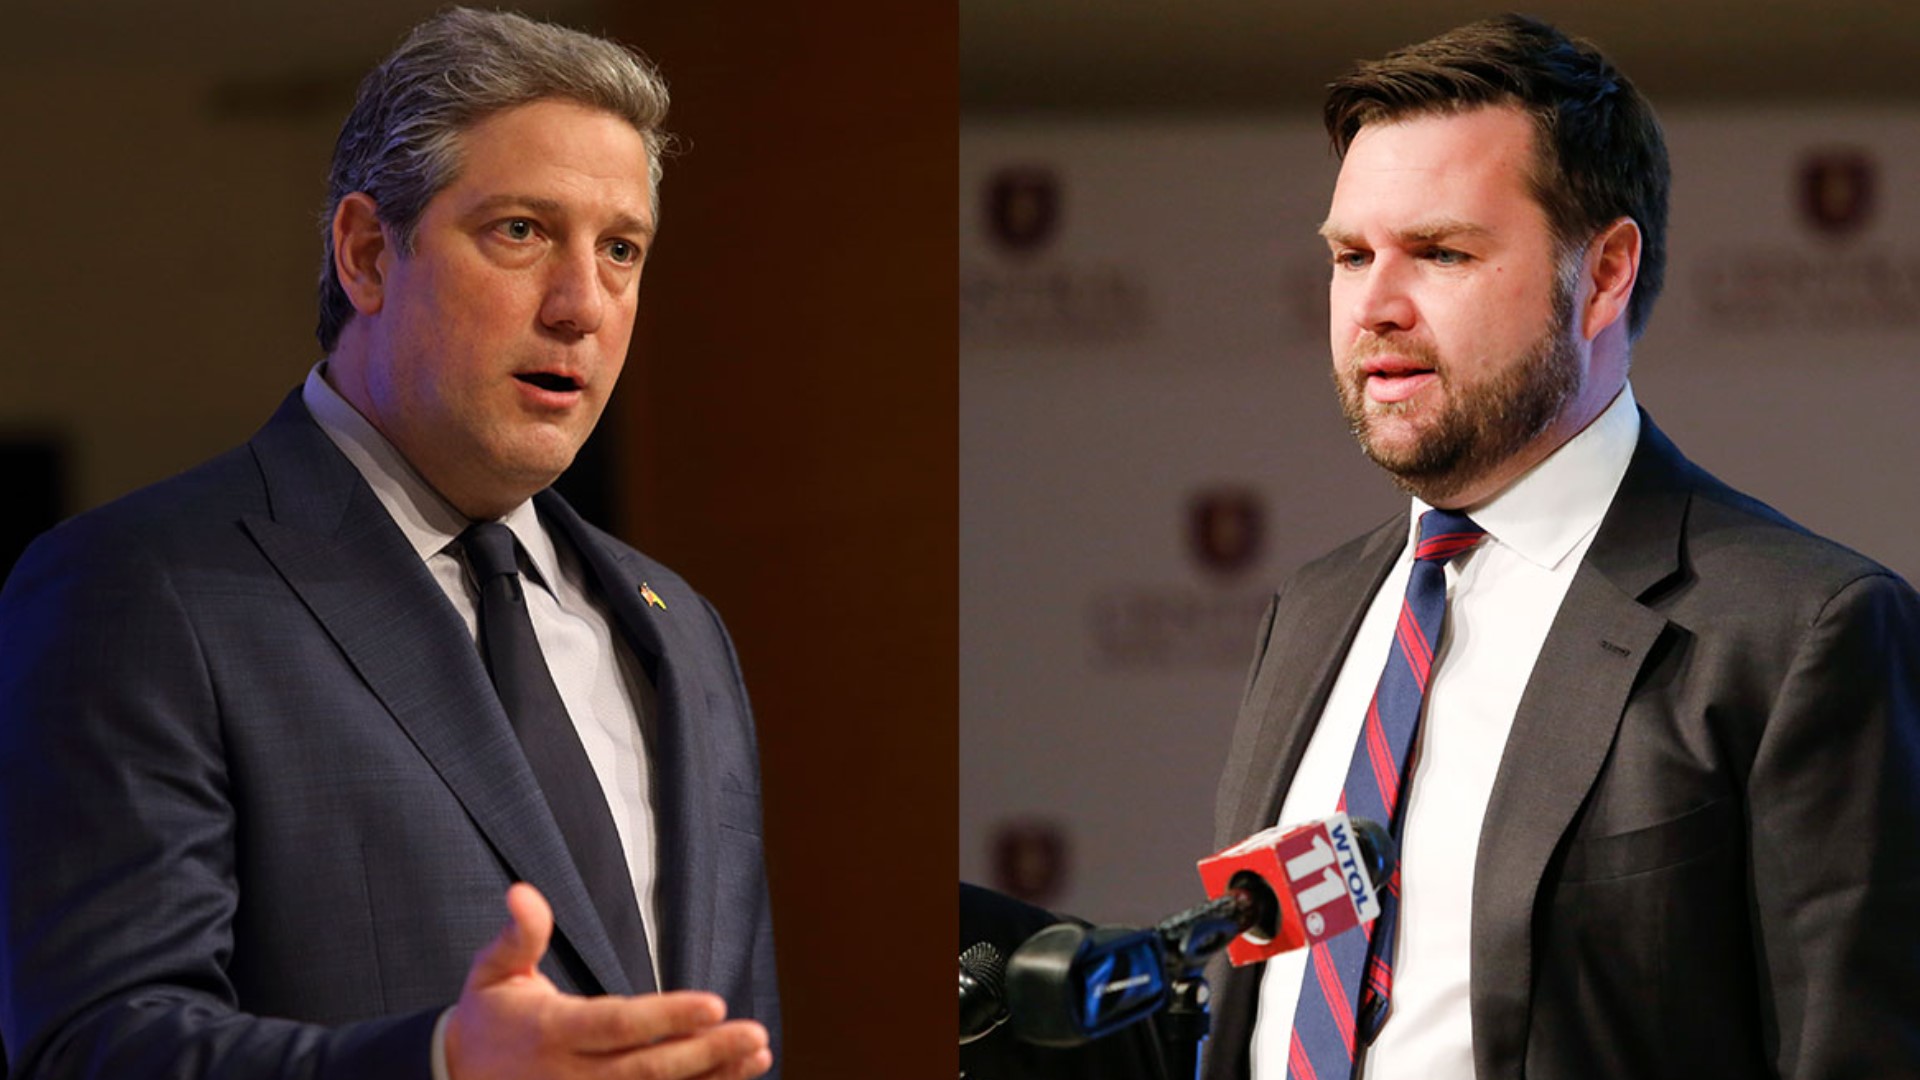 Rep. Tim Ryan and J.D. Vance are projected to face each other in the U.S. Senate race while Gov. Mike DeWine will face Democrat Nan Whaley.